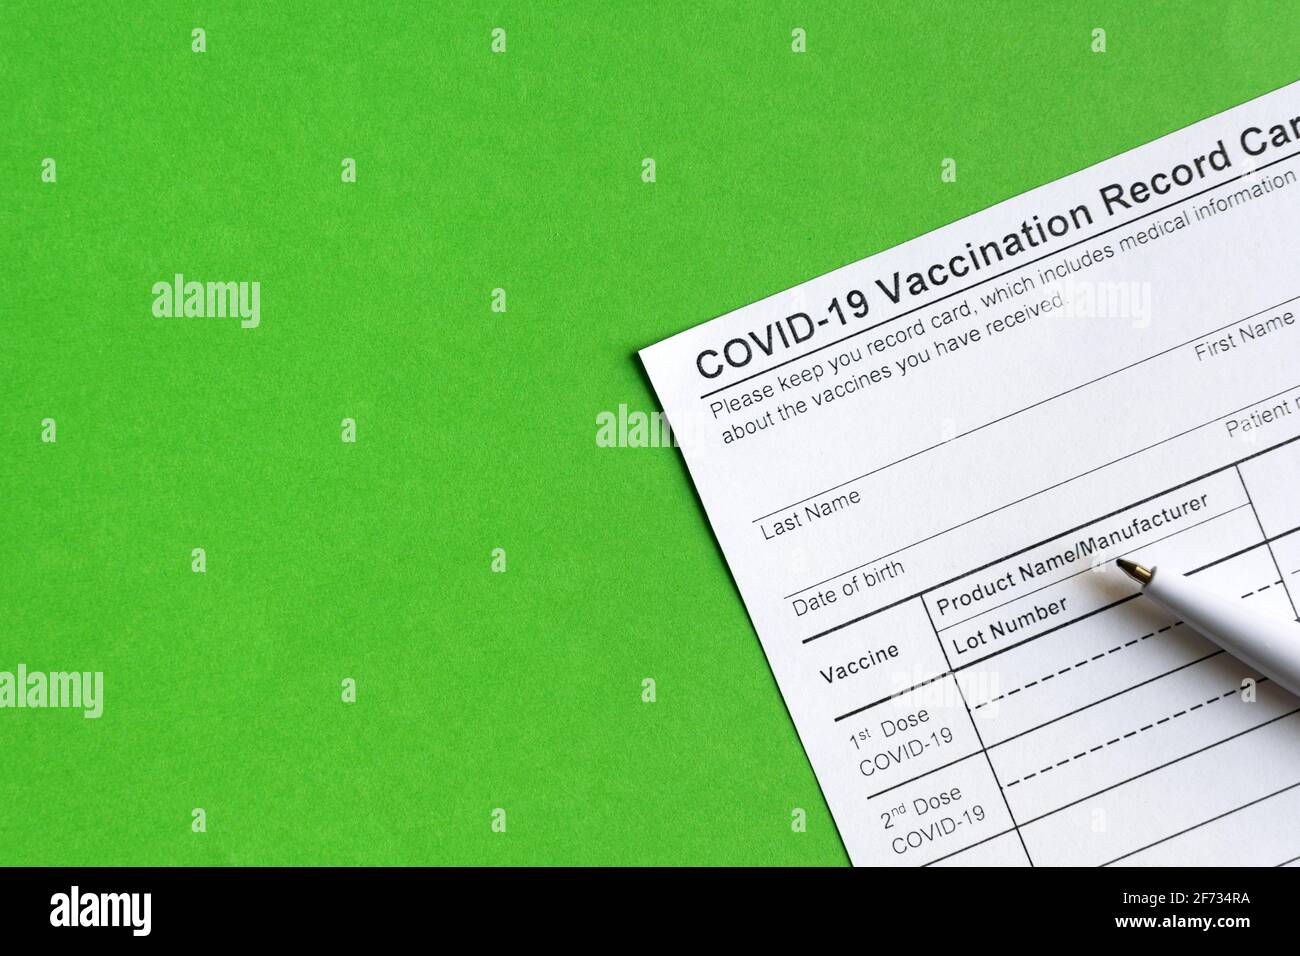 COVID-19 Vaccination Record Card on green background, coronavirus immunization certificate with copy space. Top view of paper medical form required fo Stock Photo